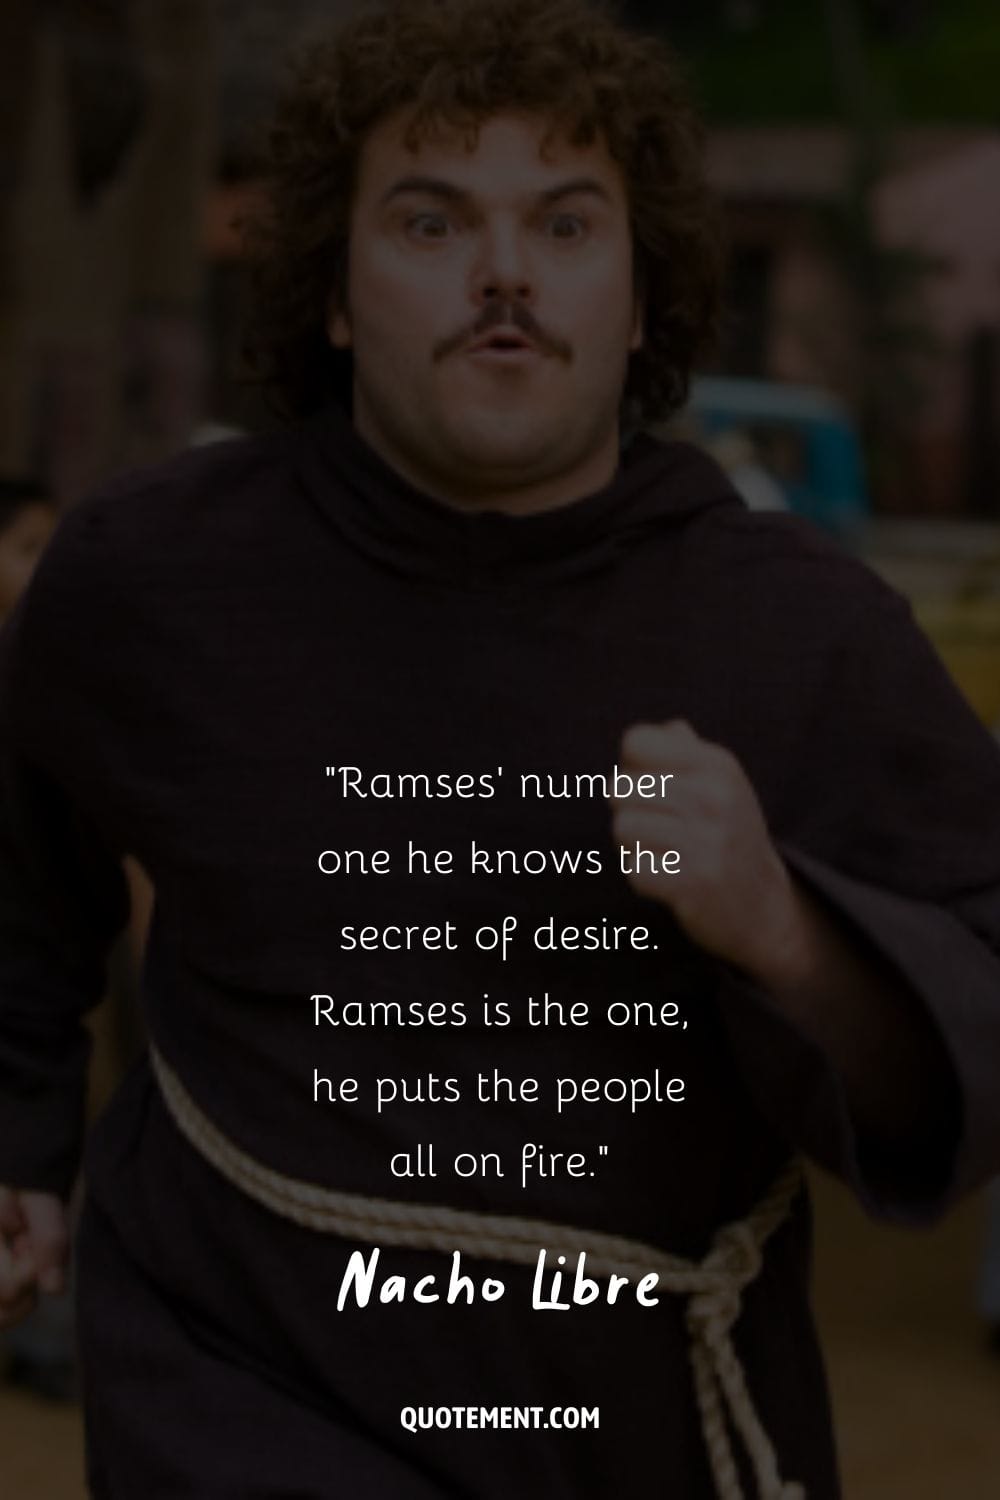 Ramses’ number one he knows the secret of desire. Ramses is the one, he puts the people all on fire